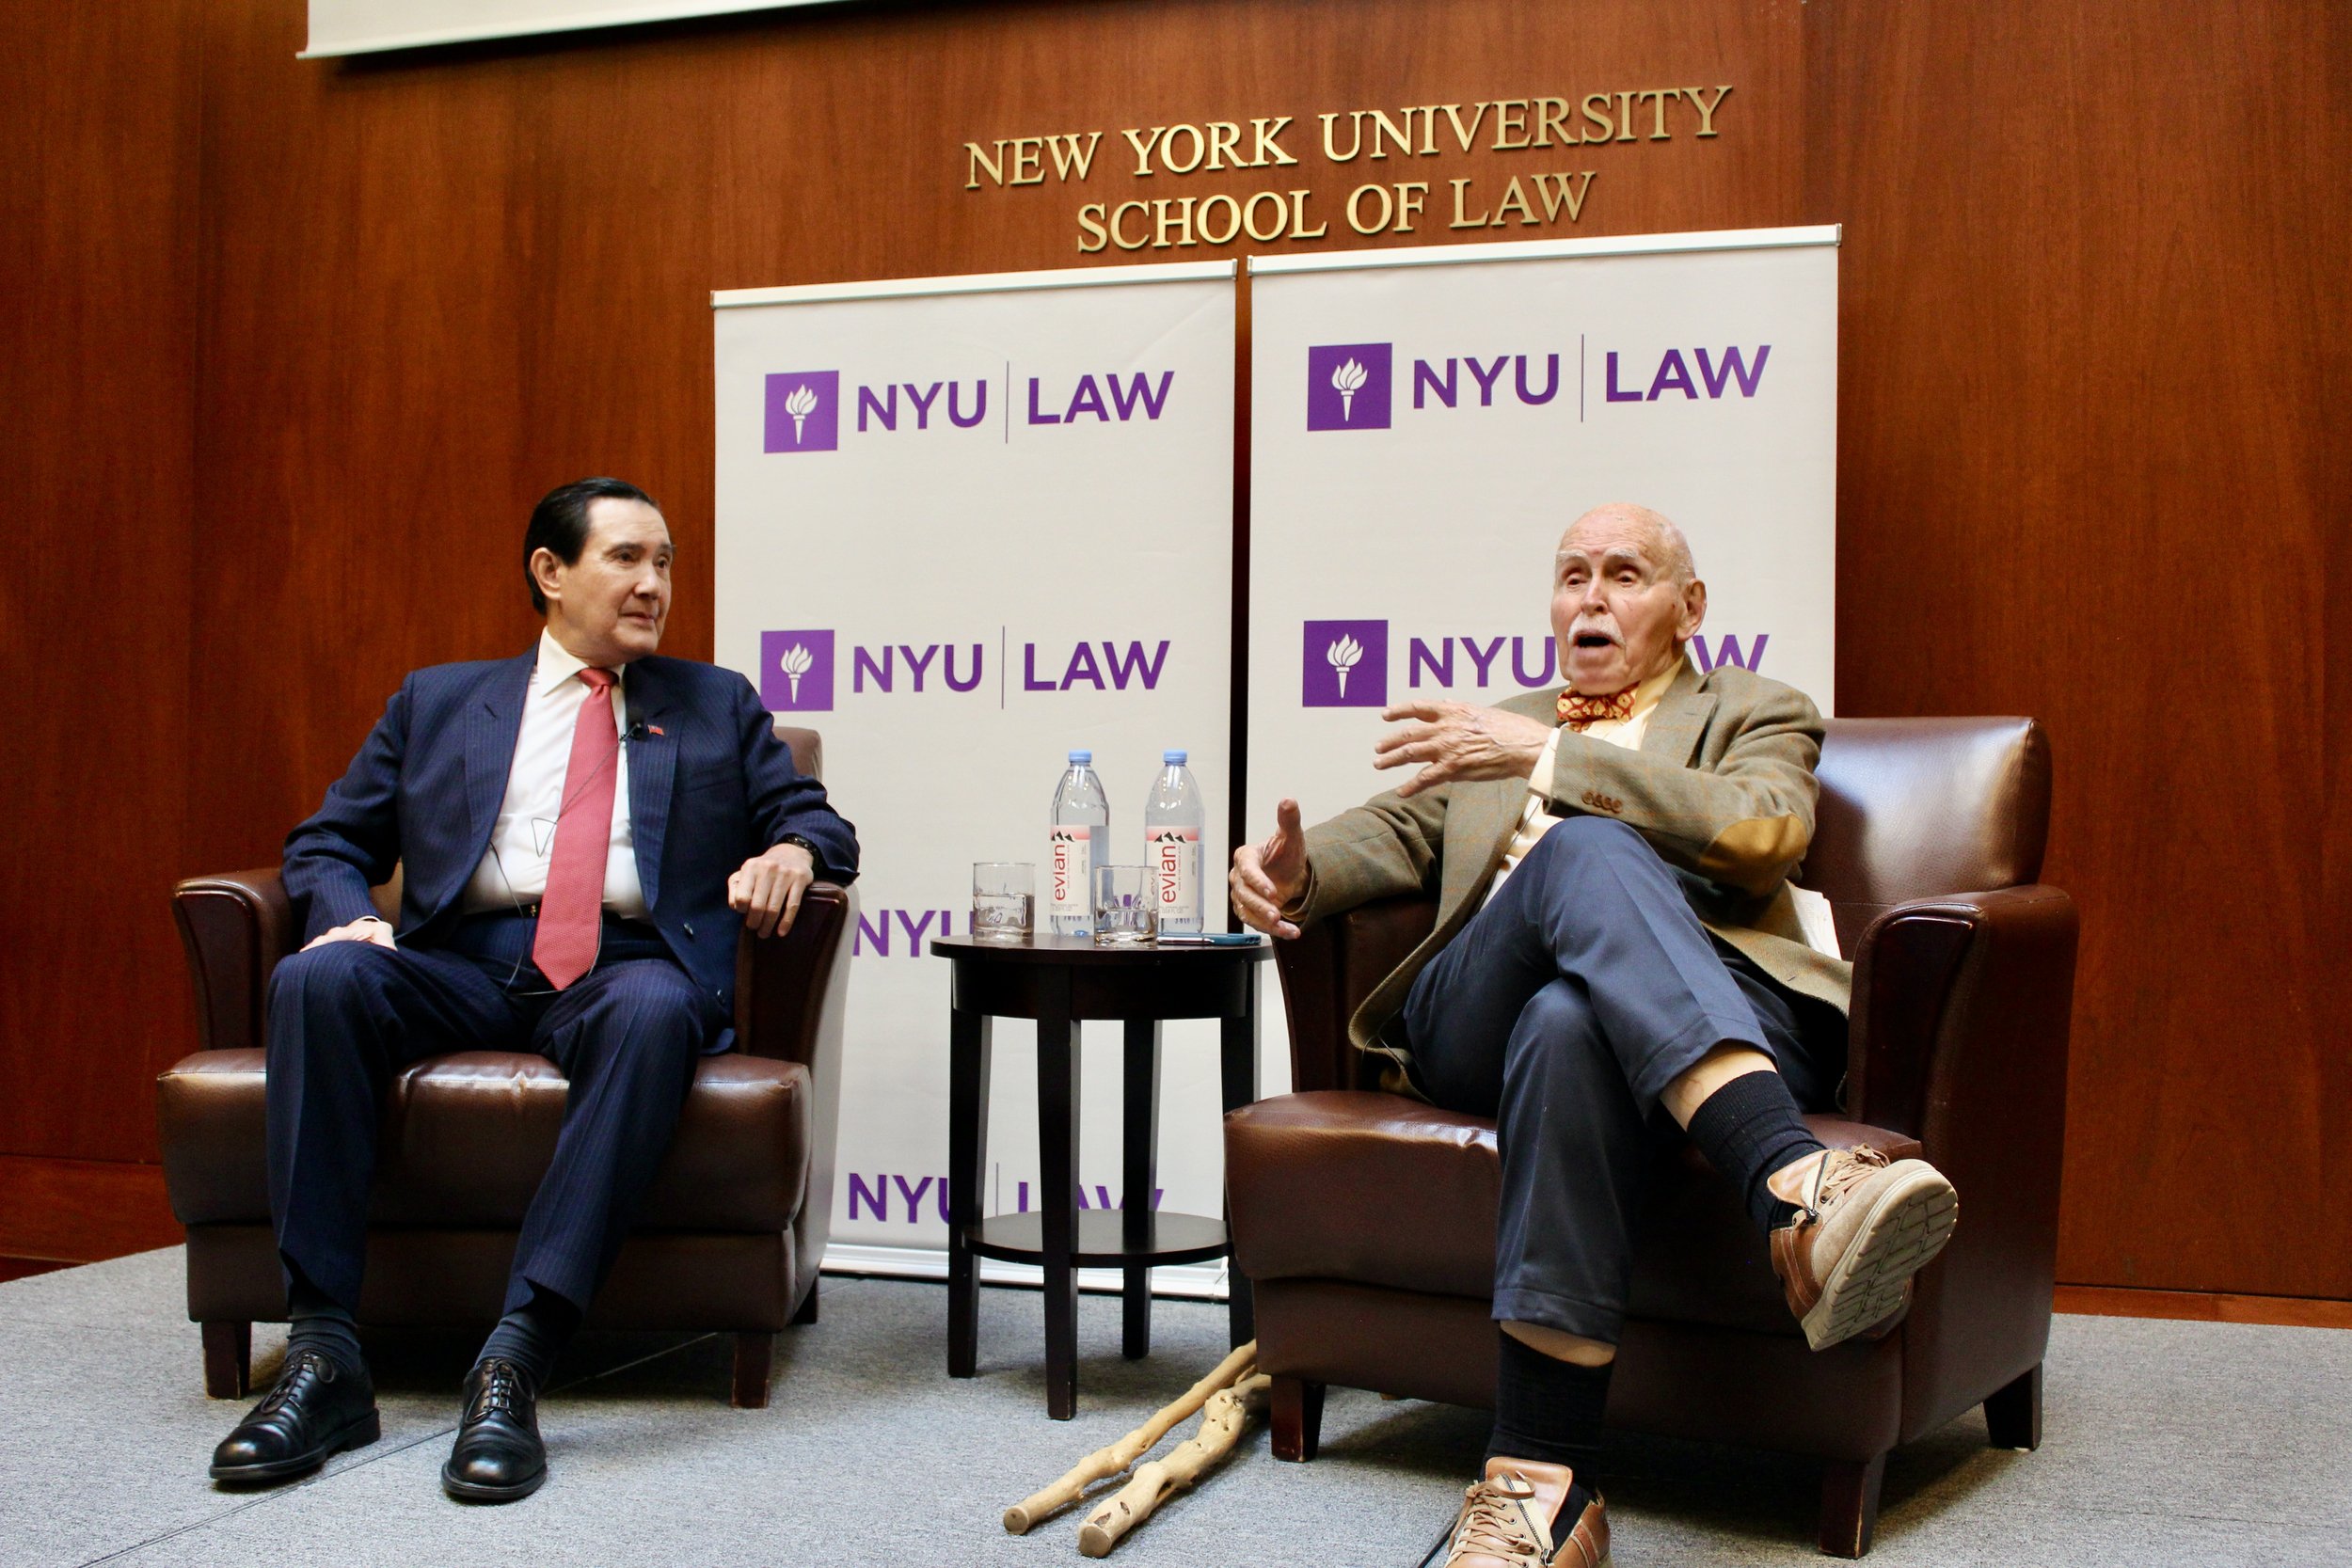 Professor Jerome Cohen and Mr. Ma Ying-jeou in conversation